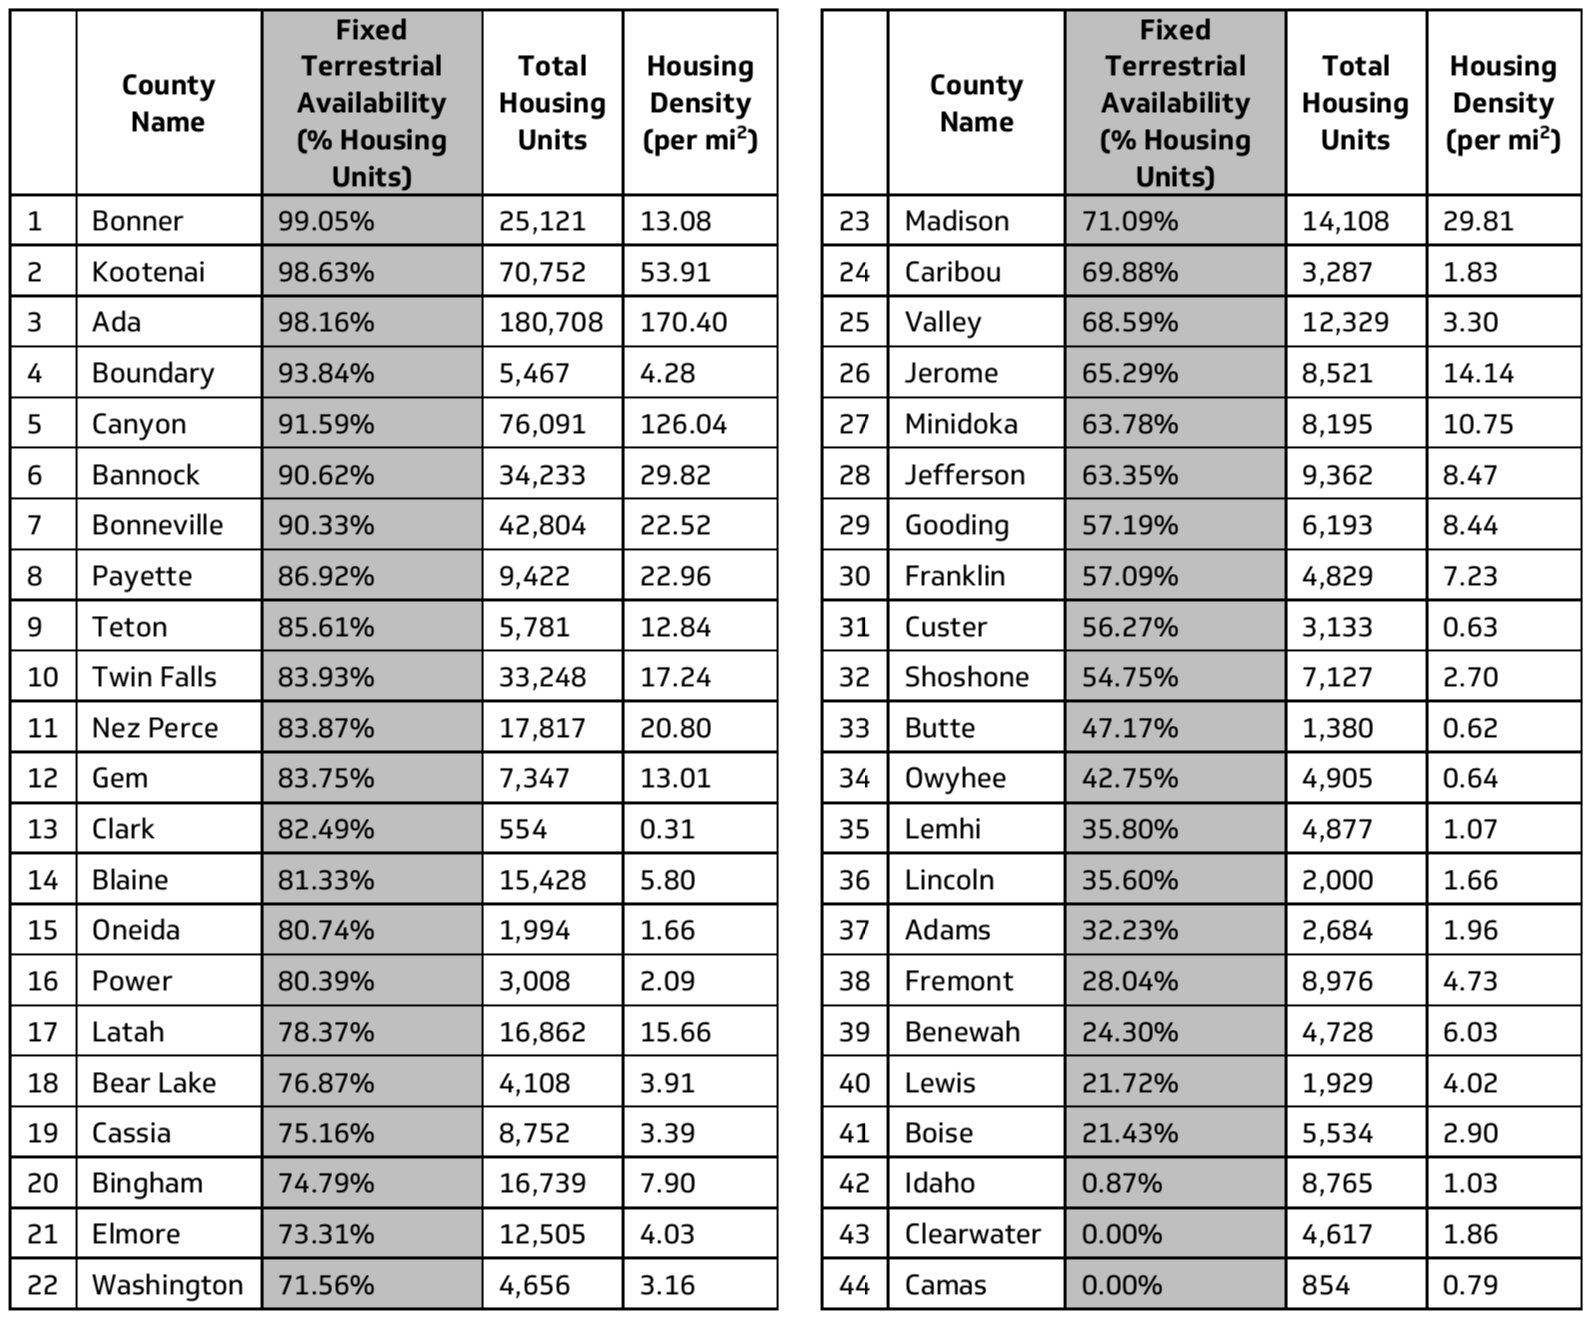 Table 5. Idaho Counties by Percentage of Housing Units with Fixed Terrestrial Broadband Availability